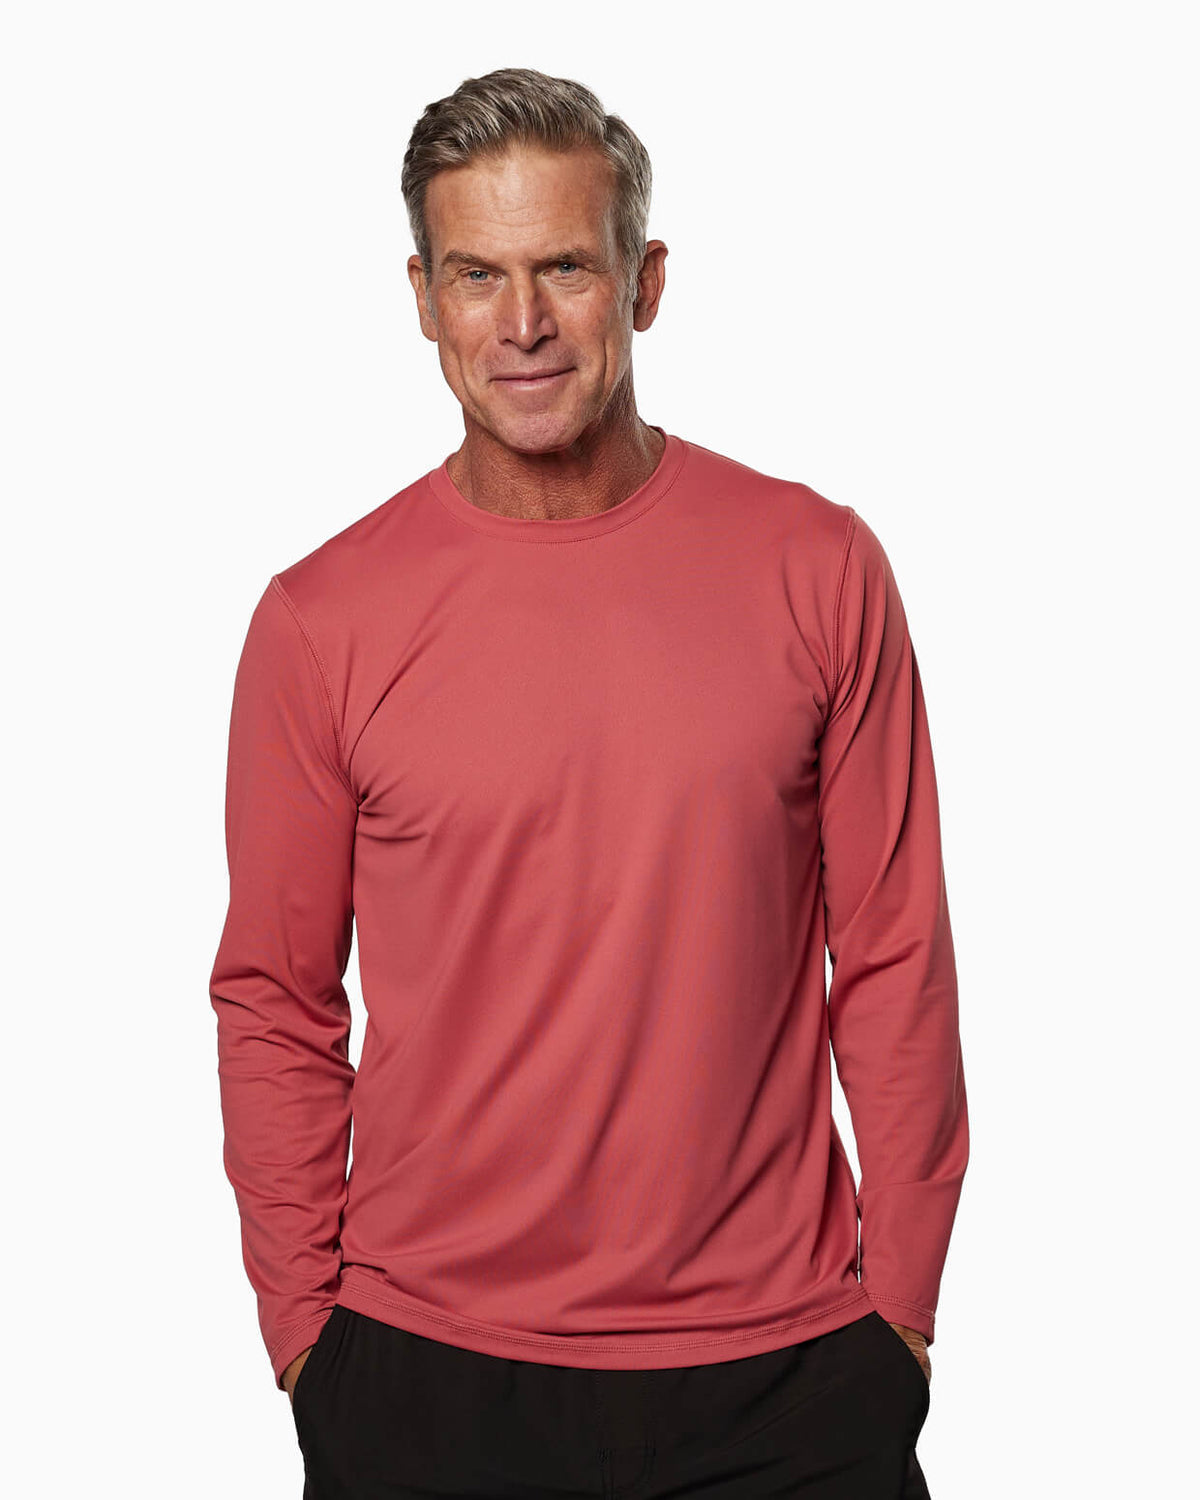 Protector Element Guard | UPF 50+ Long Sleeve UV Protective Shirt ELEMENT SPICE  front #color_element spice